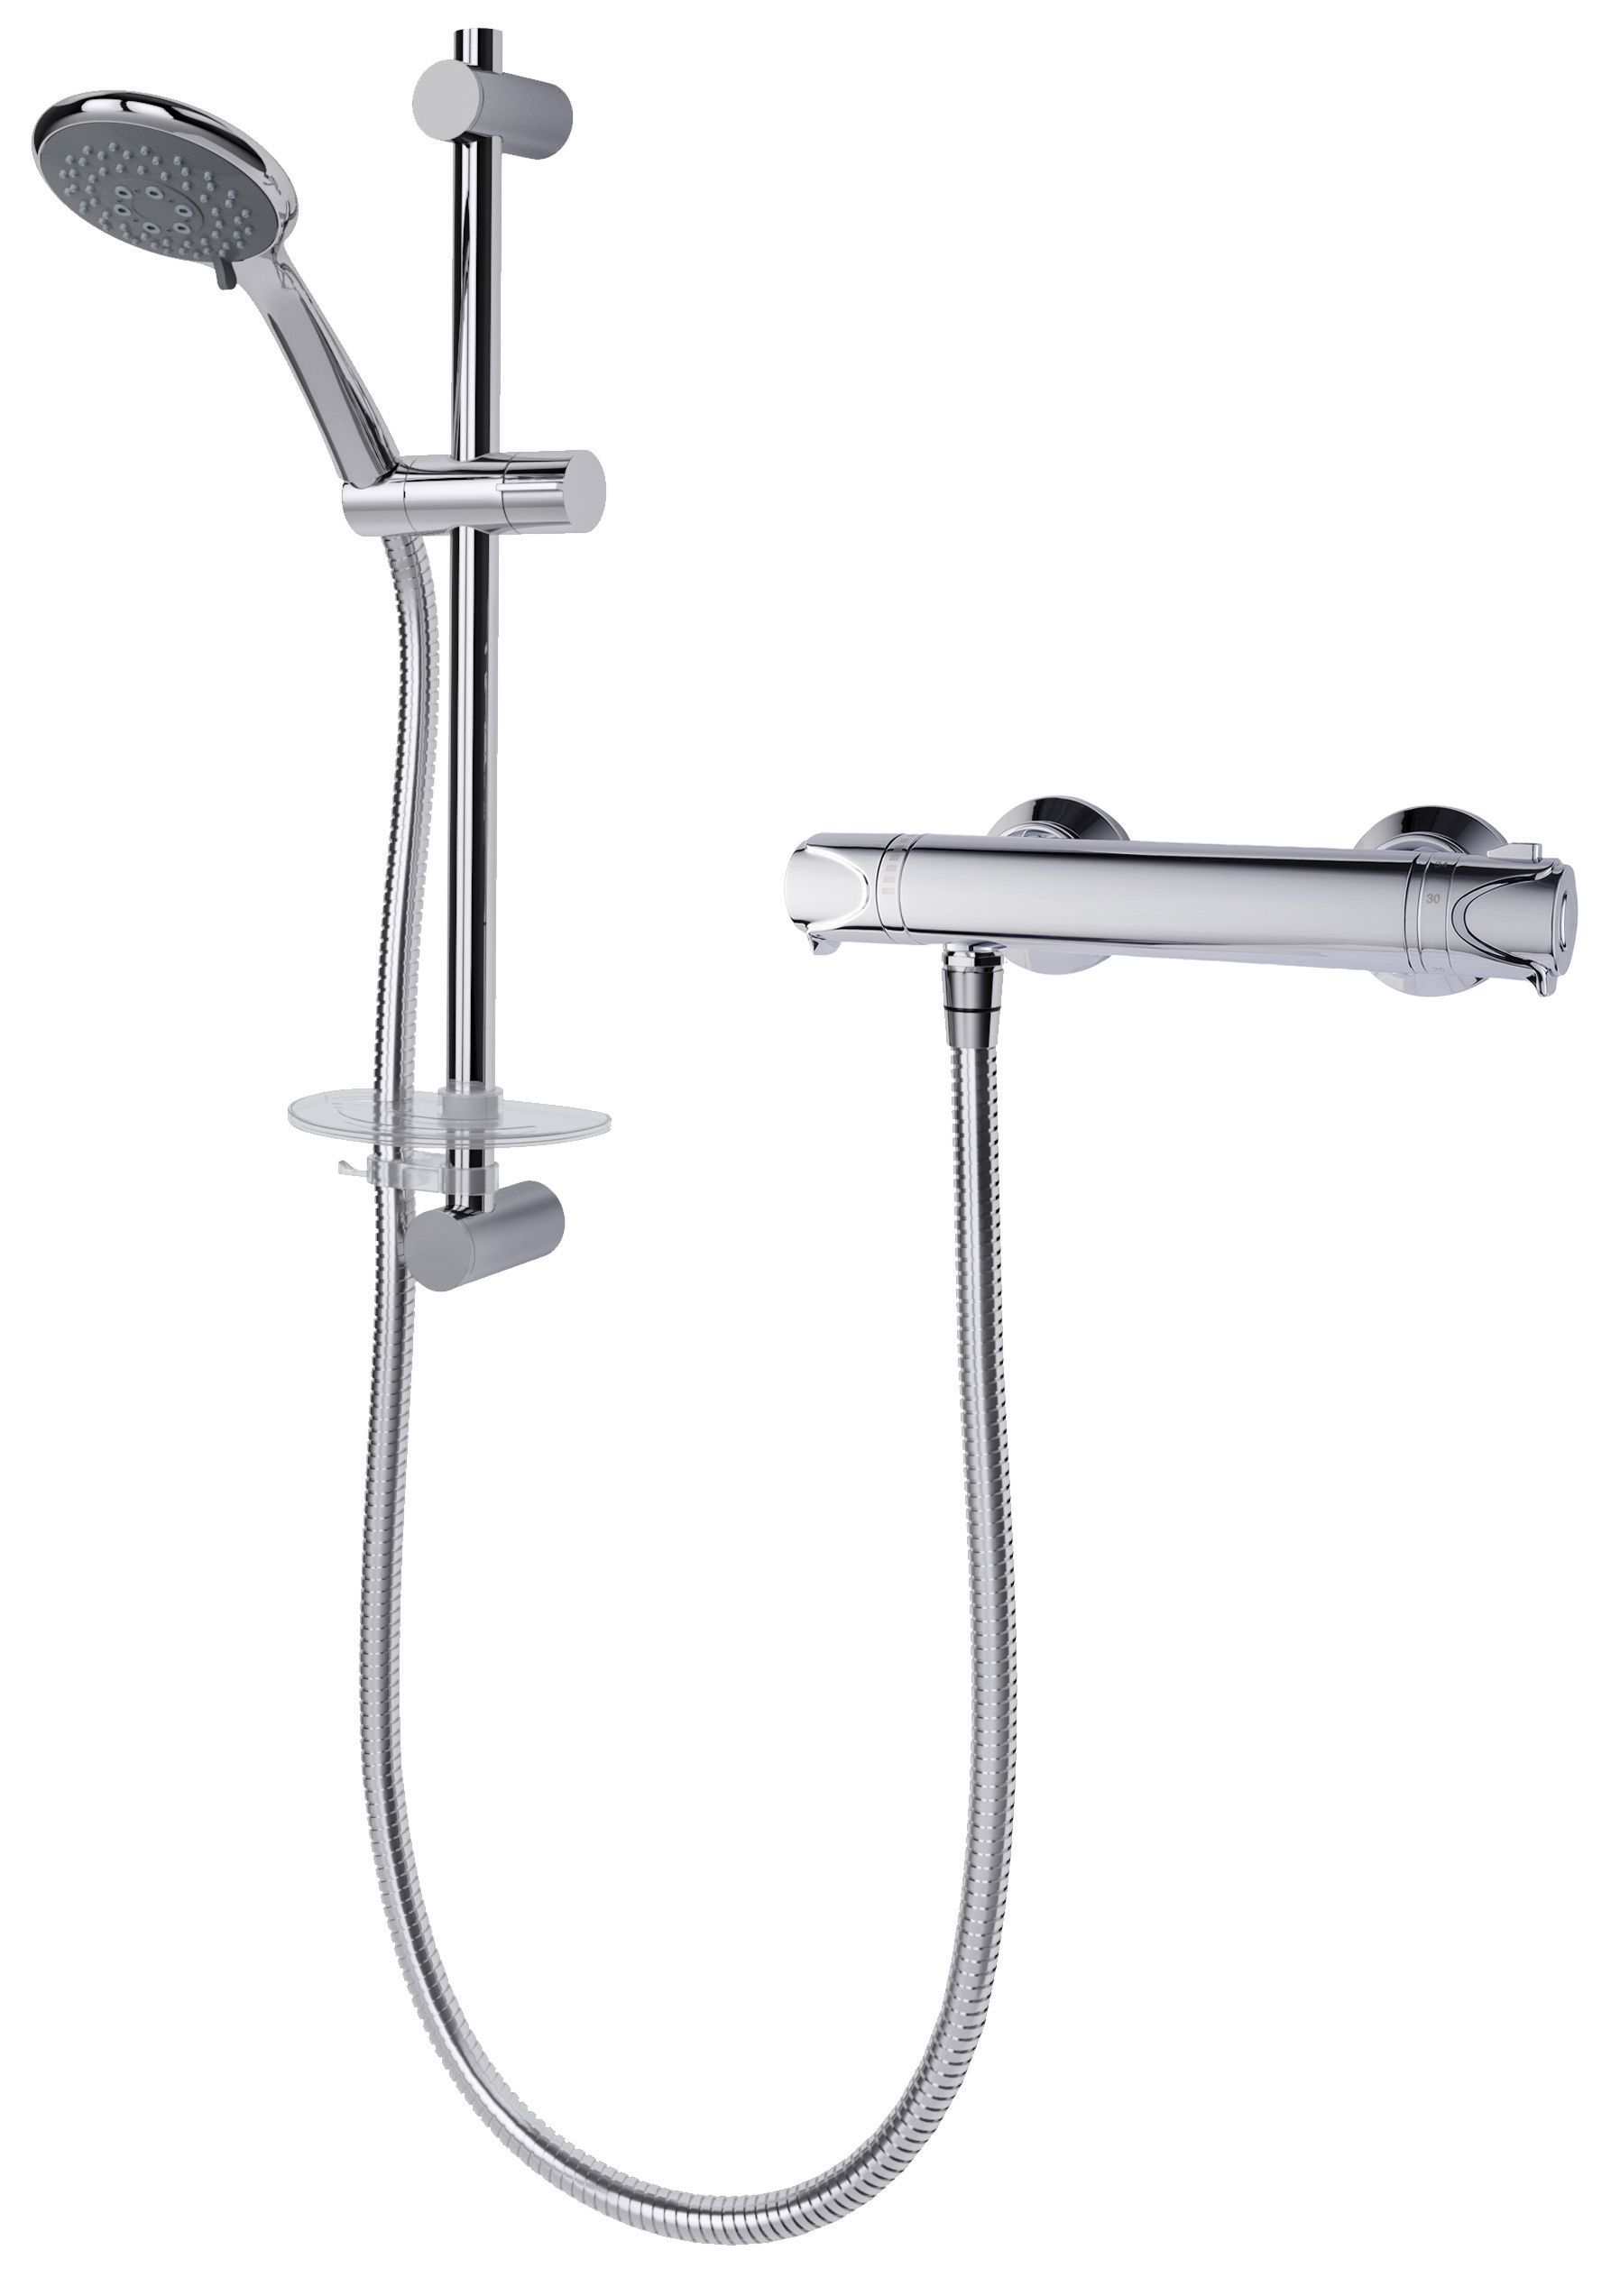 Image of Triton Tian Thermostatic Mixer Shower